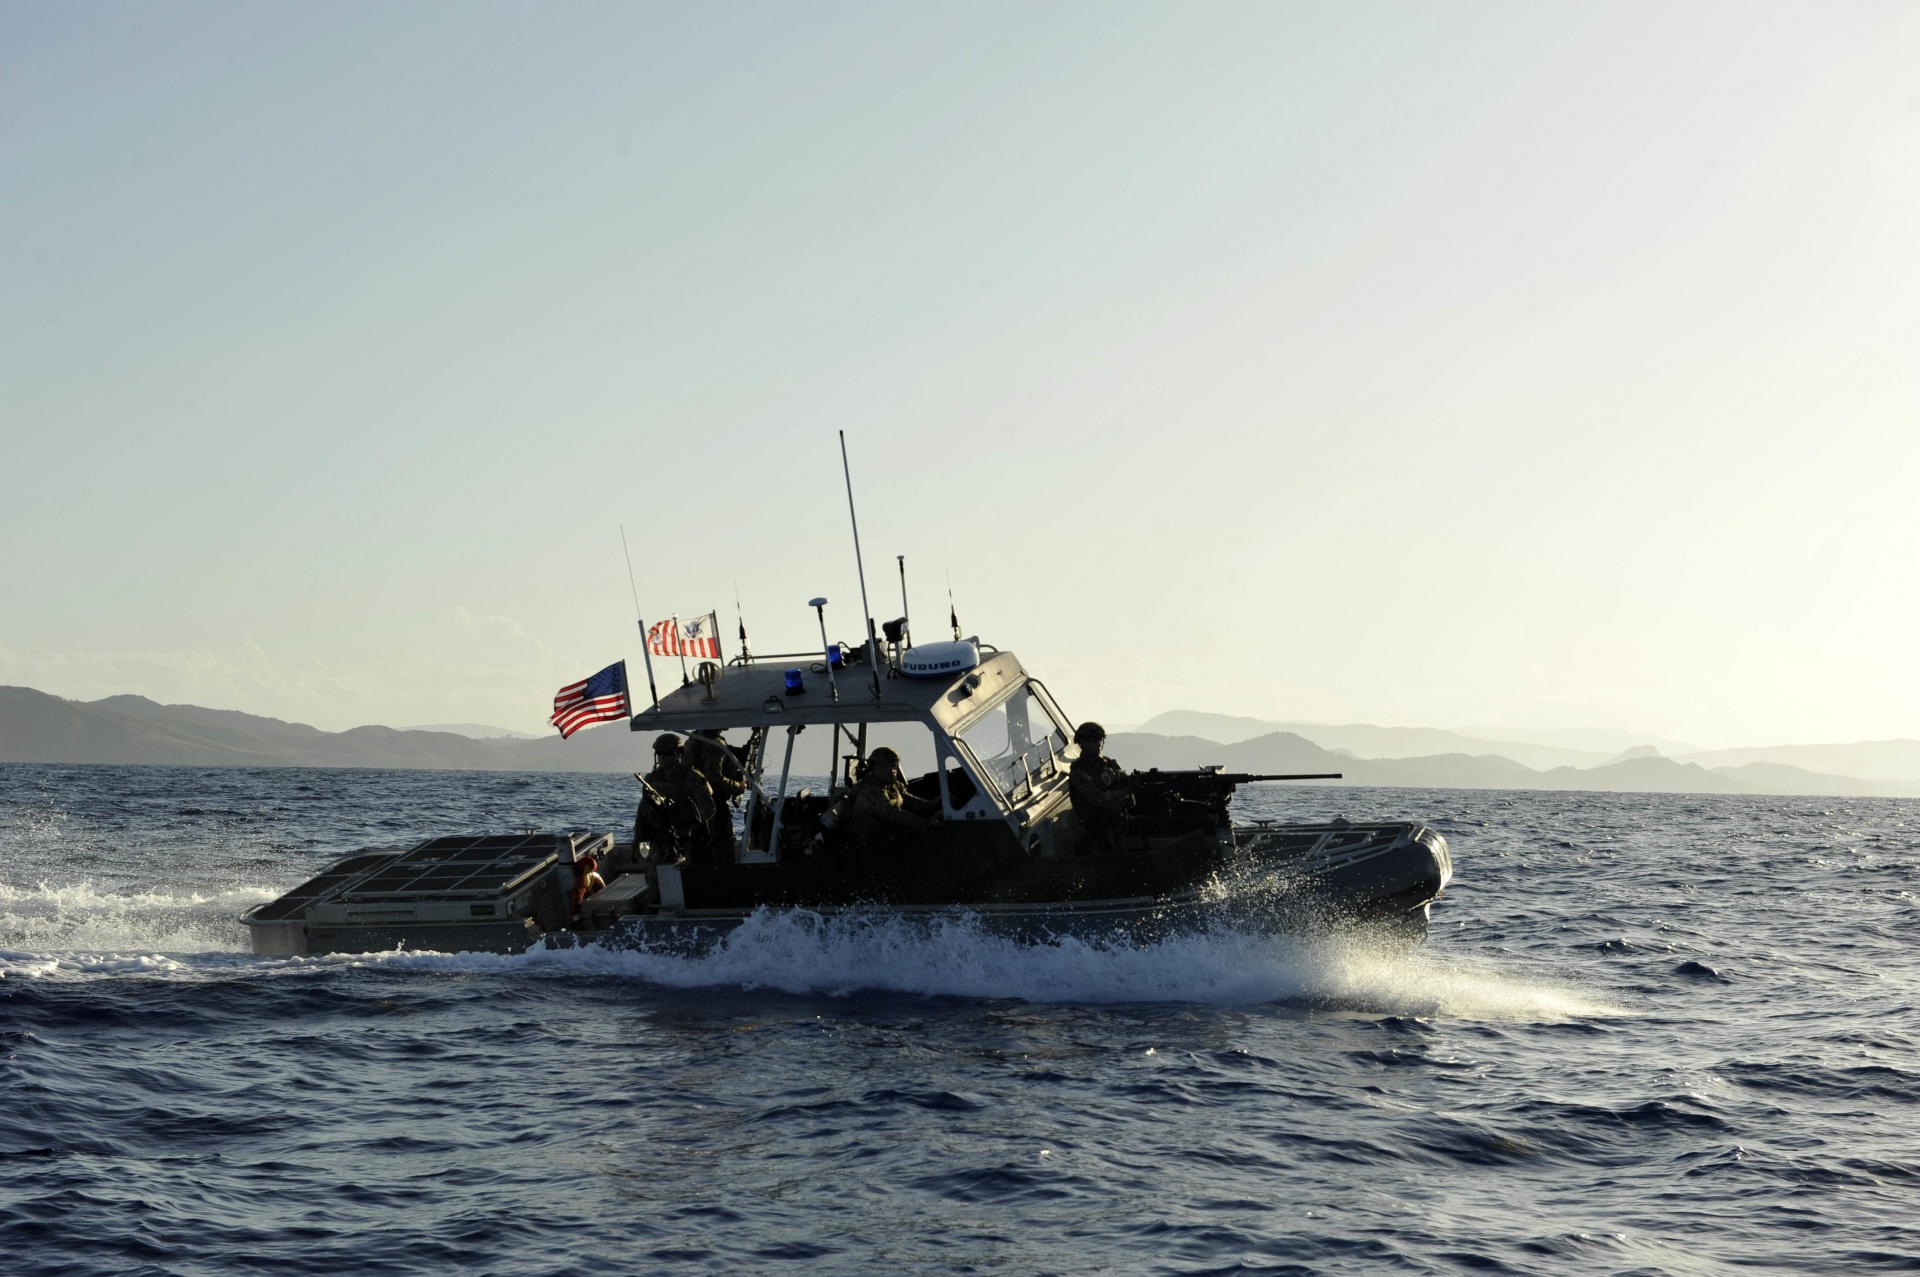 oast Guardsmen from Port Security Unit 305 aboard a 32-foot Transportable Port Security Boat patrol the waters off the coast of Guantanamo Bay, Cuba, Wednesday, July 19, 2017.